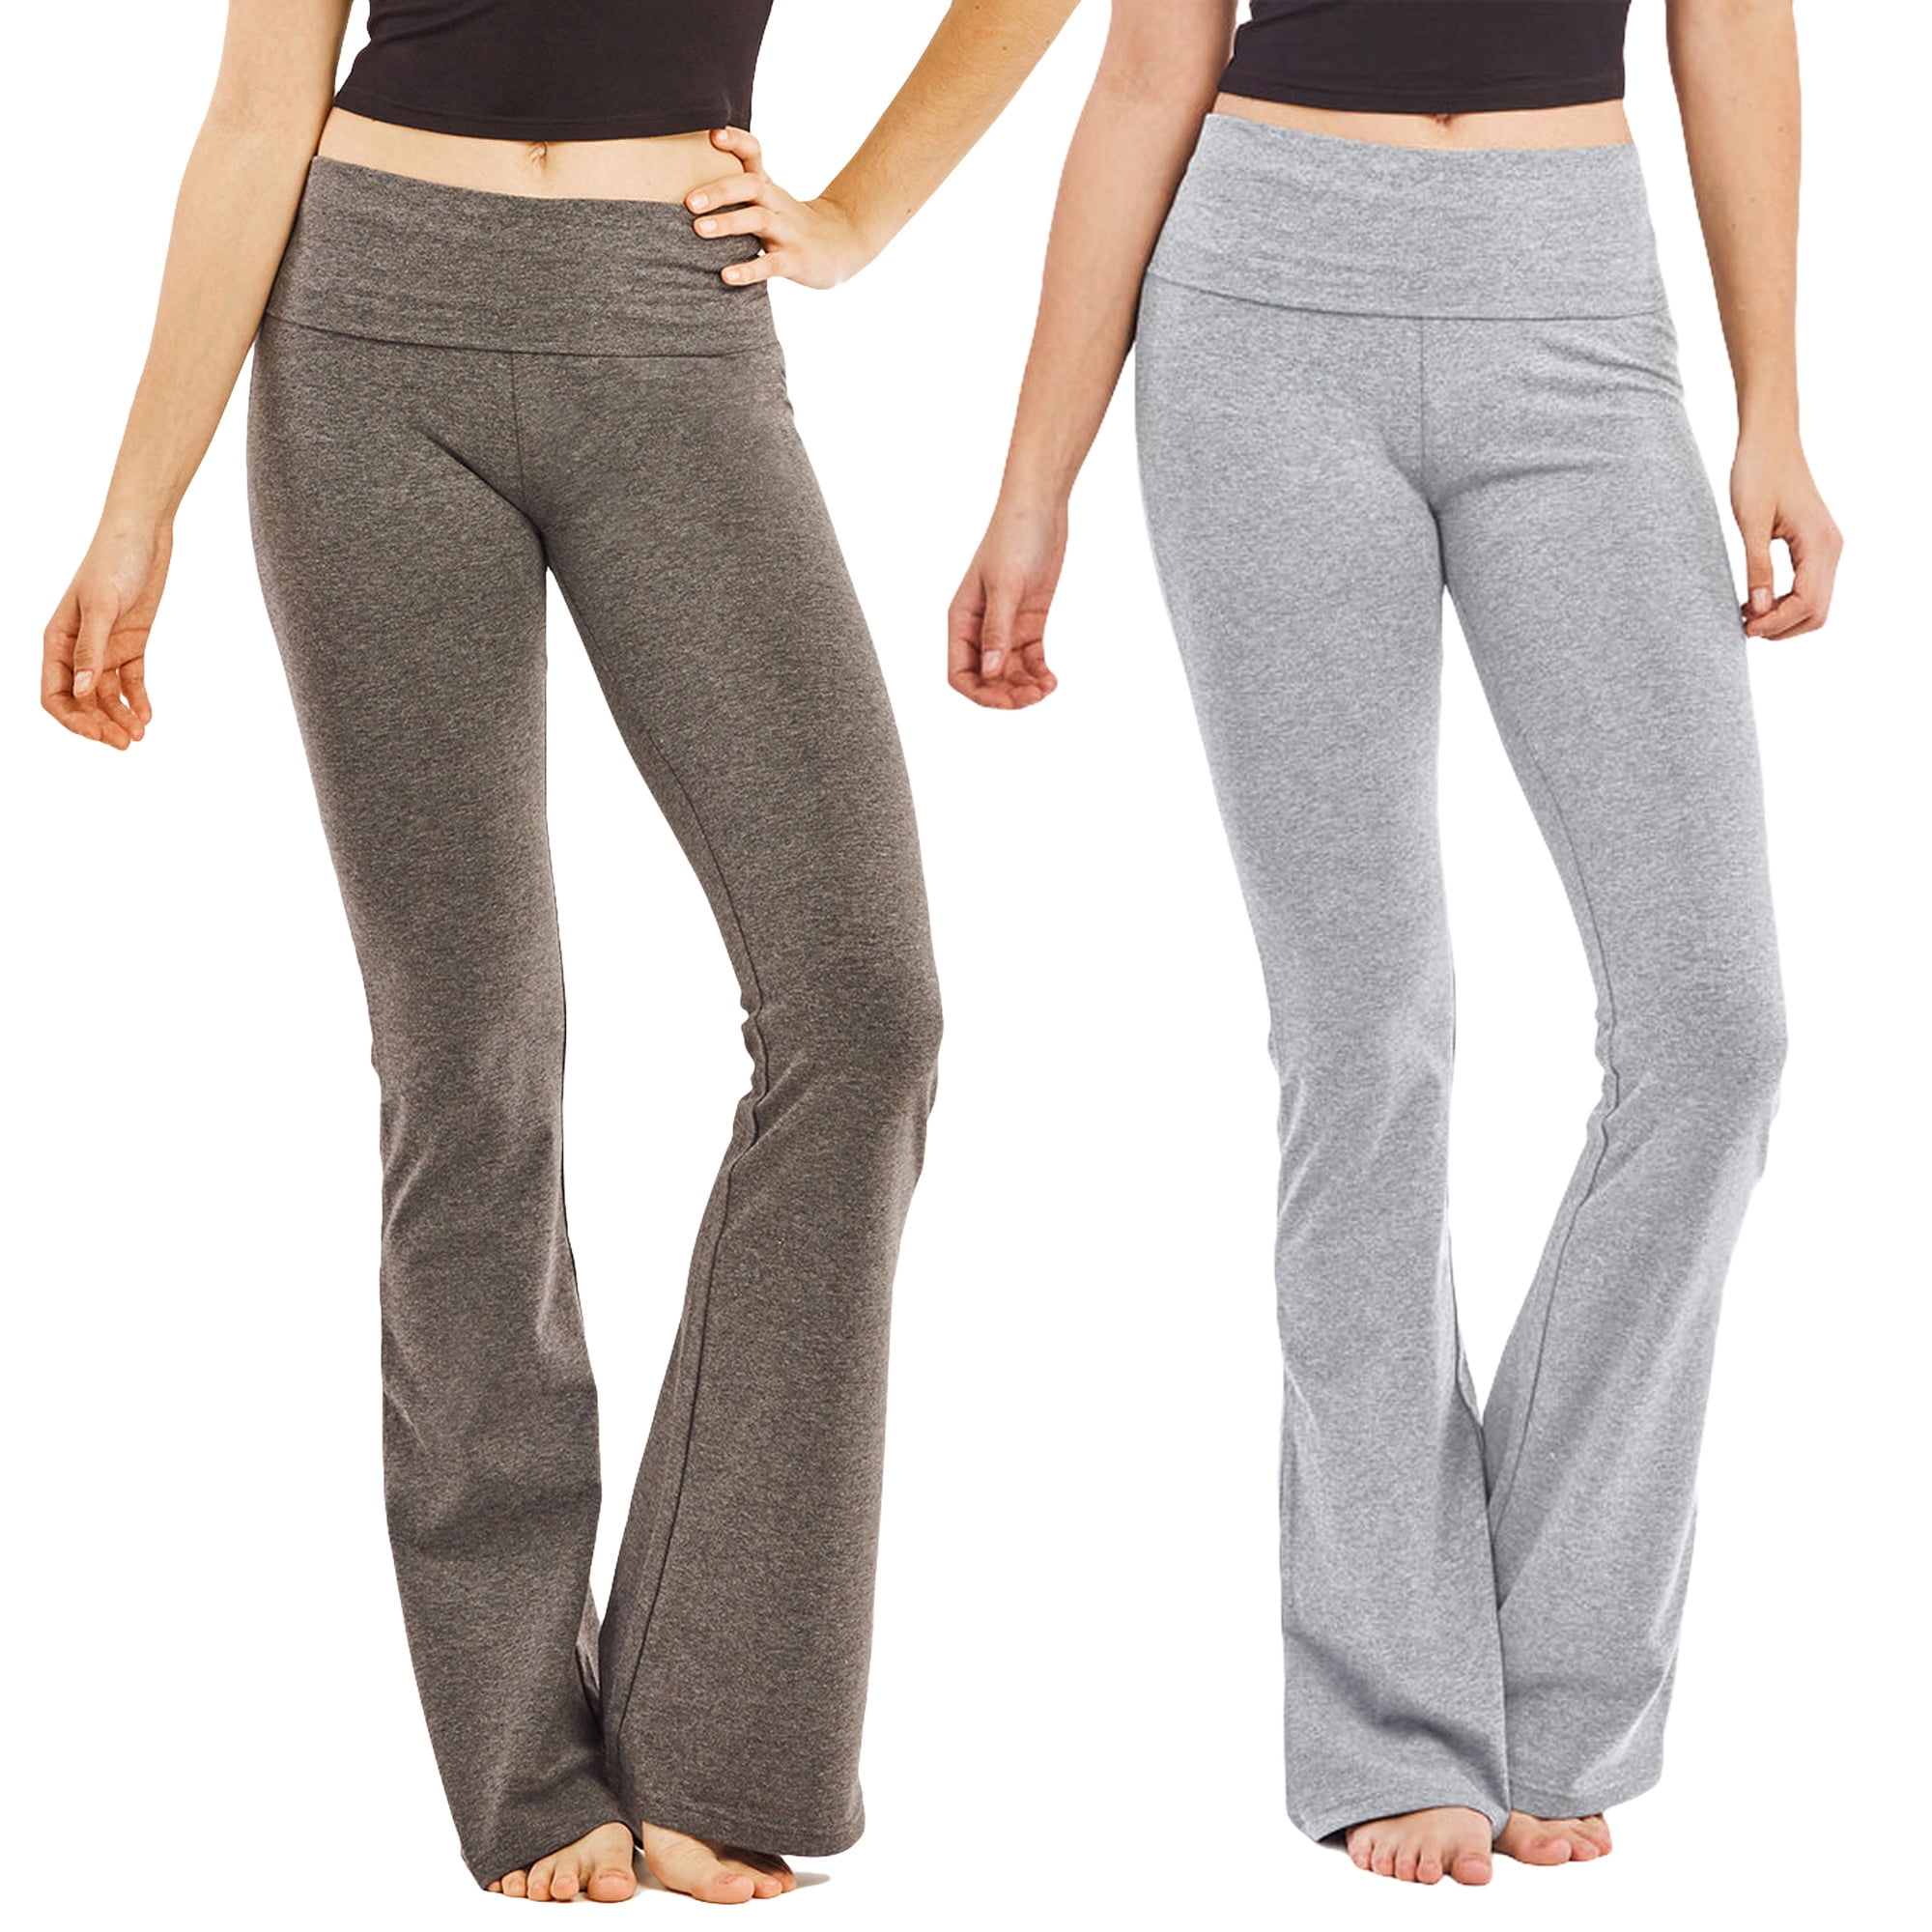 PAC 1980 PAC WHISPER Active Fold-Over Waistband Flare Yoga Pants